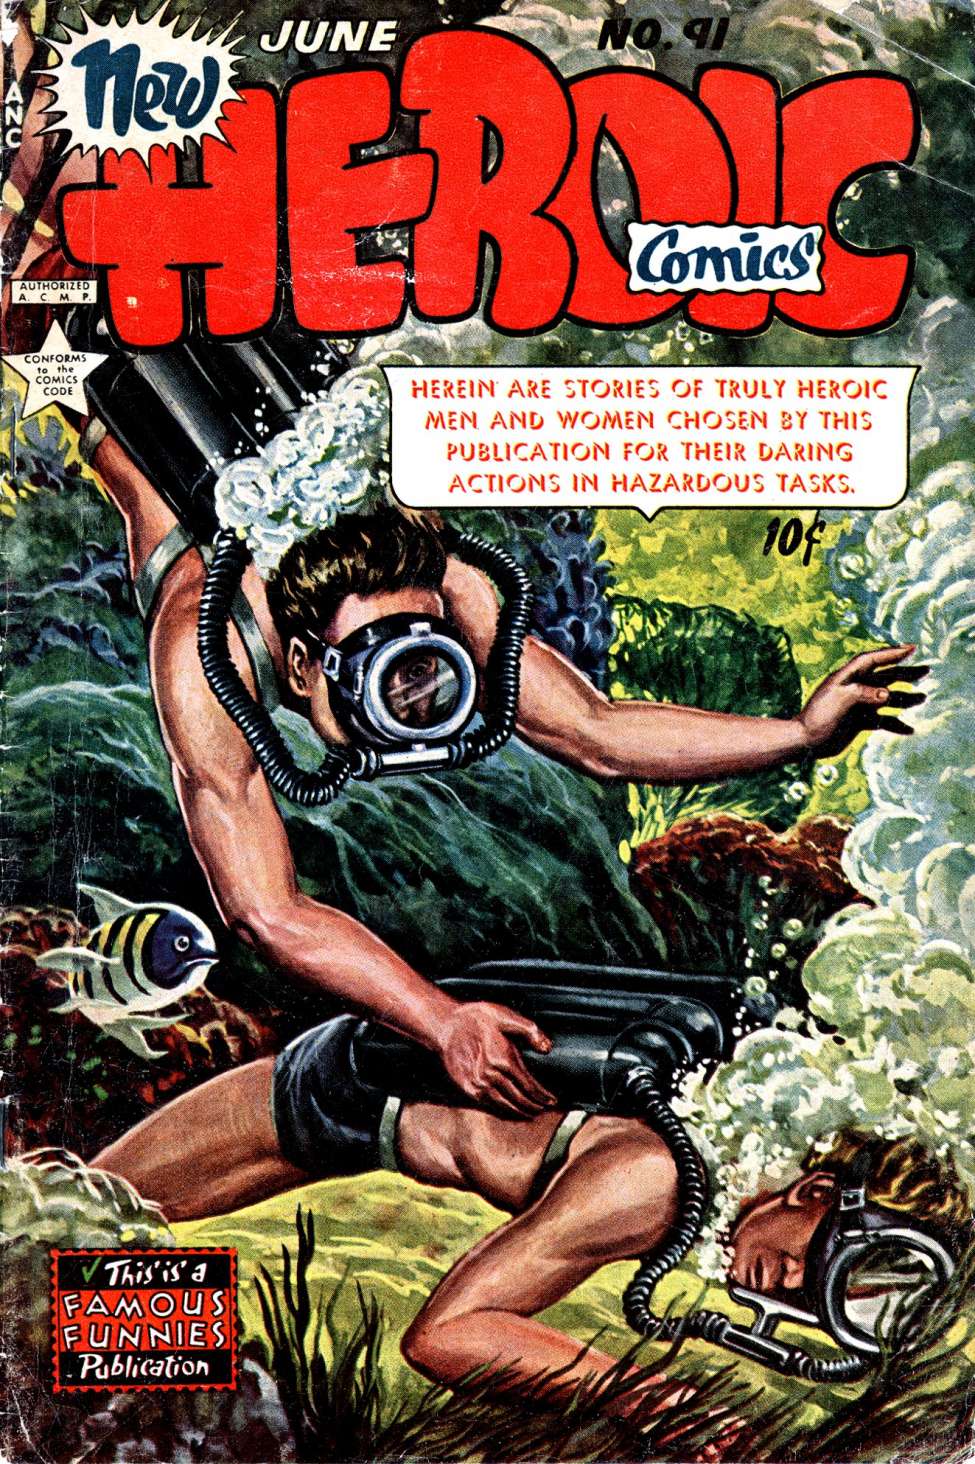 Comic Book Cover For New Heroic Comics 91 (alt) - Version 2